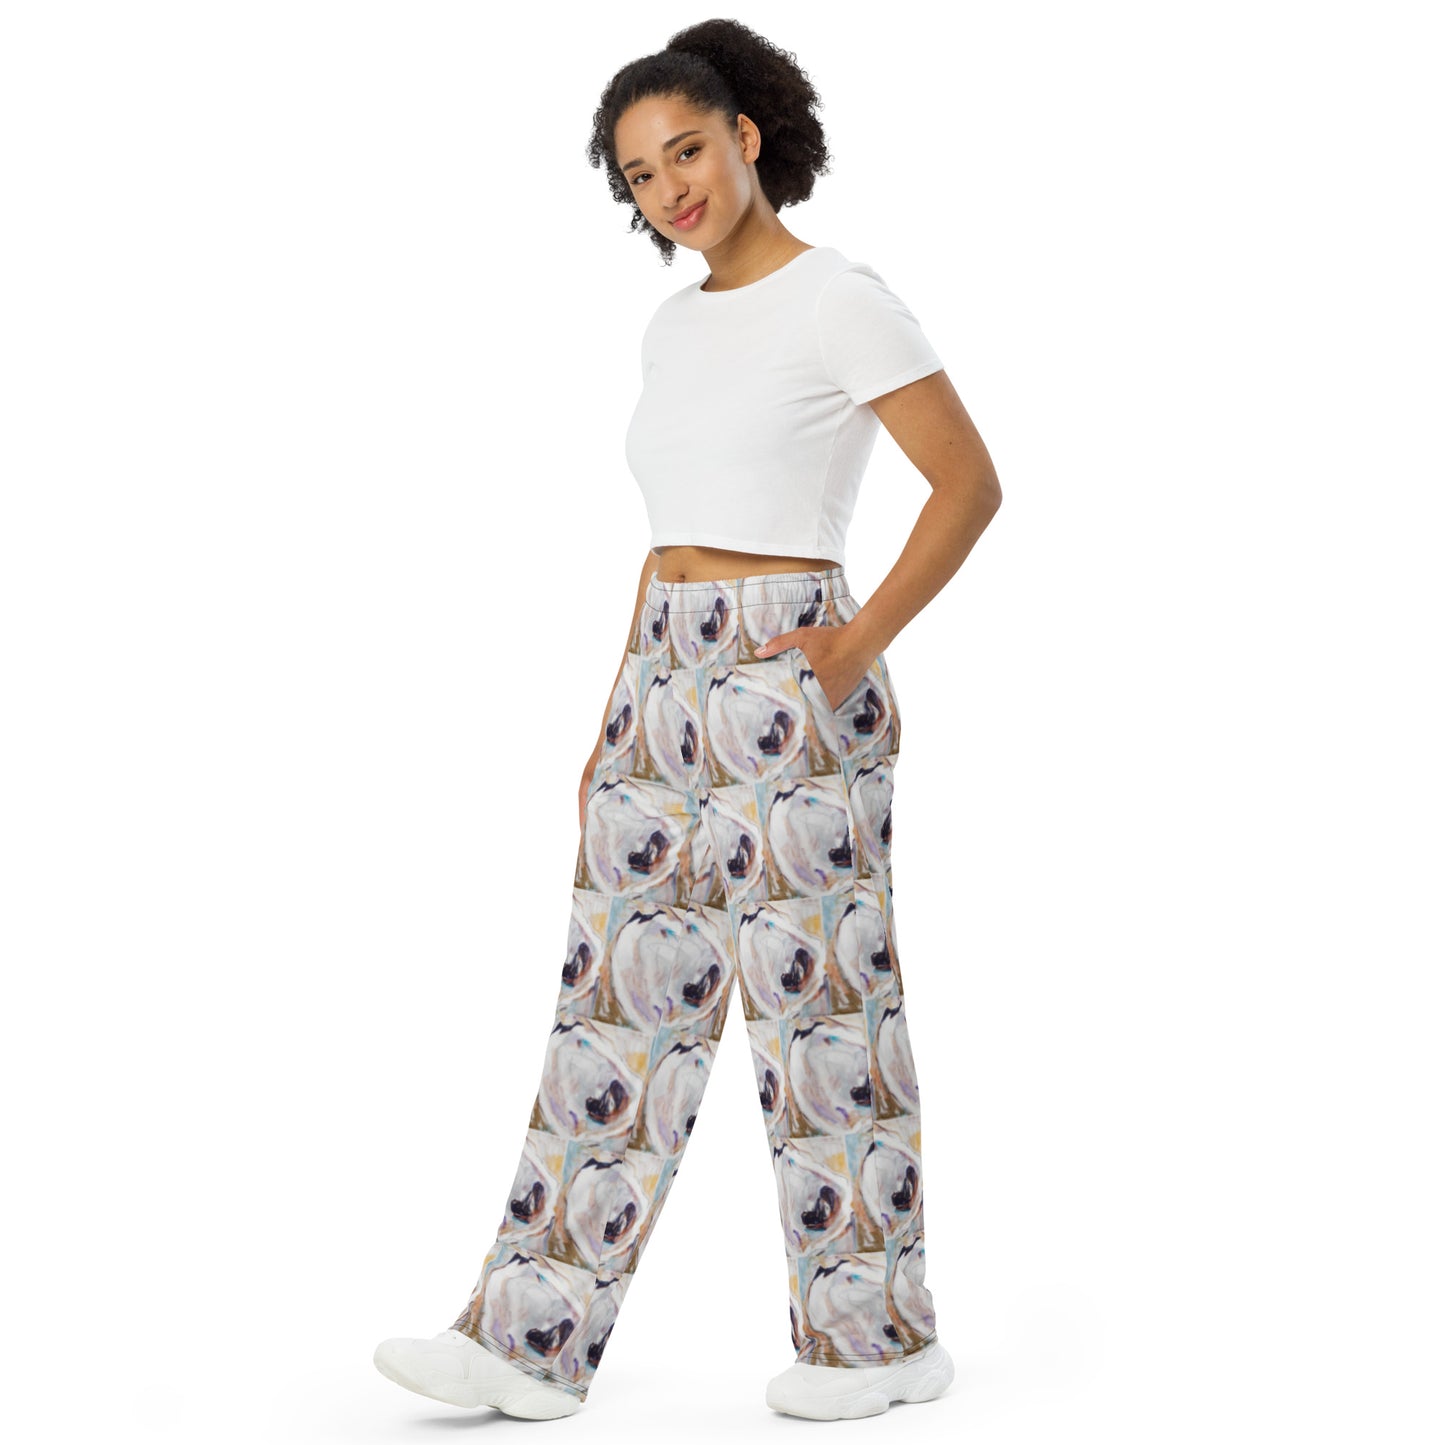 Oyster Shells All-over print unisex wide-leg pants